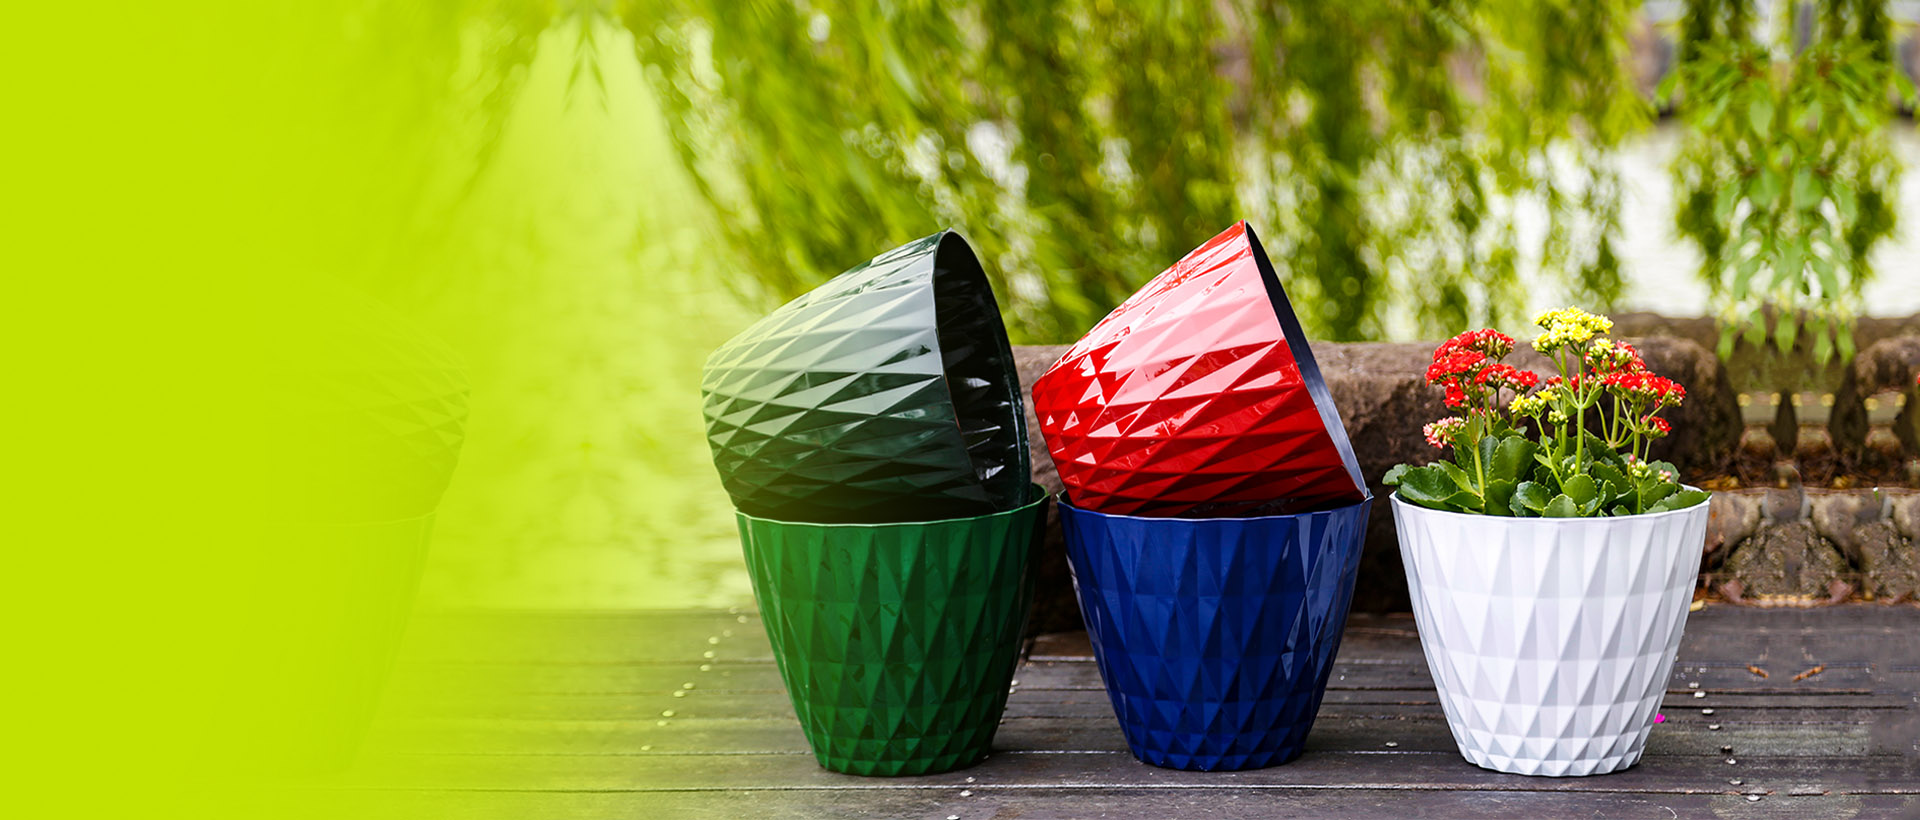 Highlighting the diverse styles of flower pots